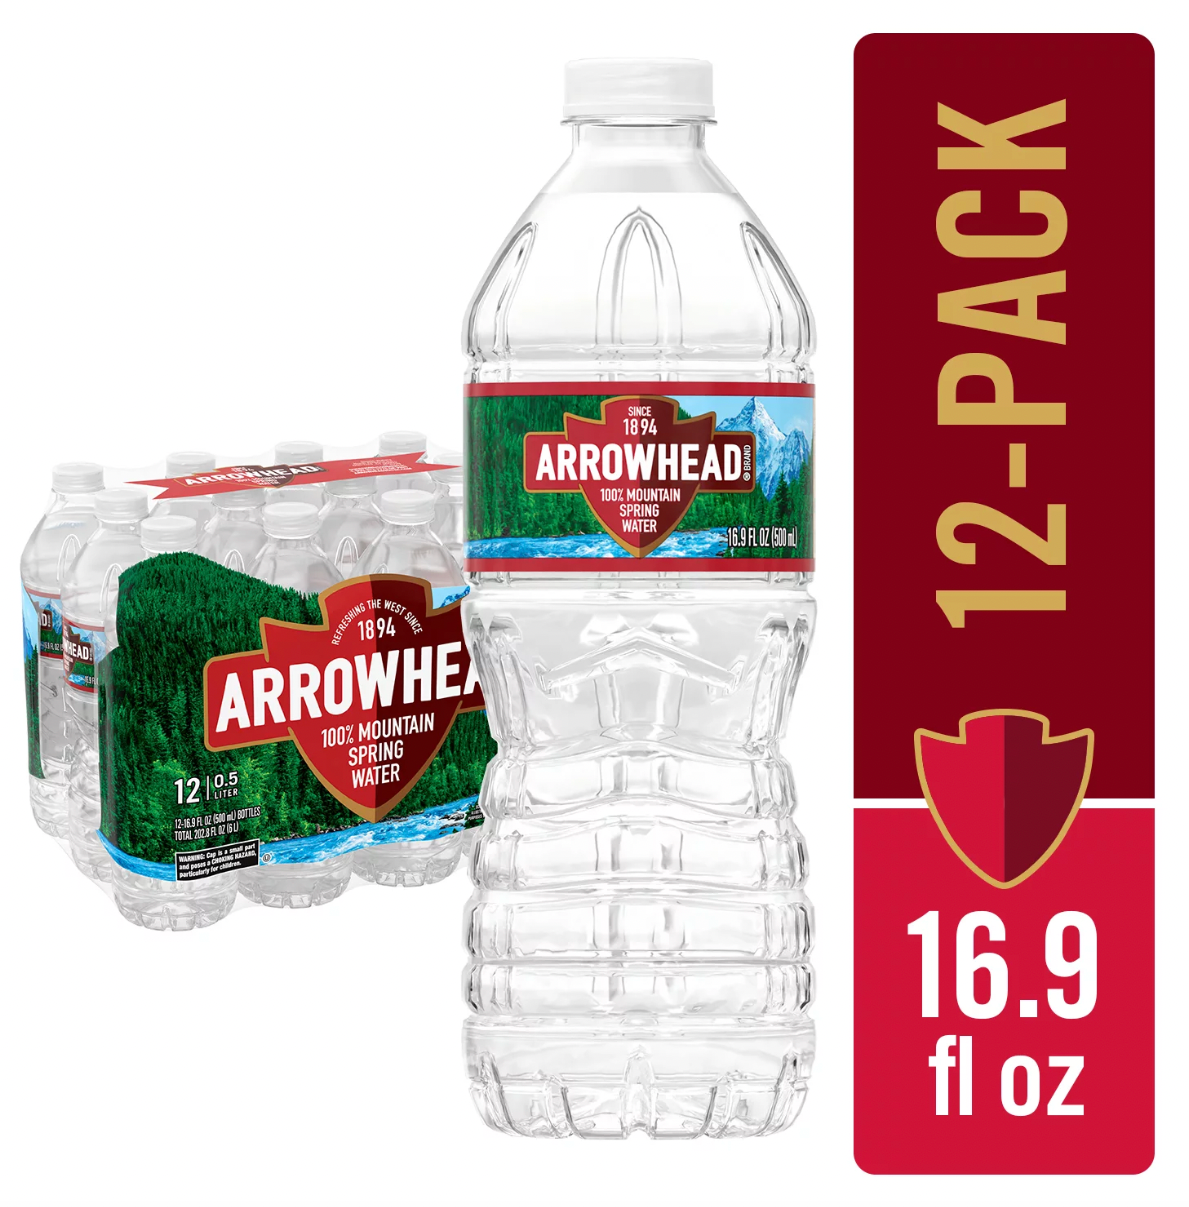 Arrowhead 100% Mountain Spring Water 12 Count Pack / 16.9 FL. OZ.